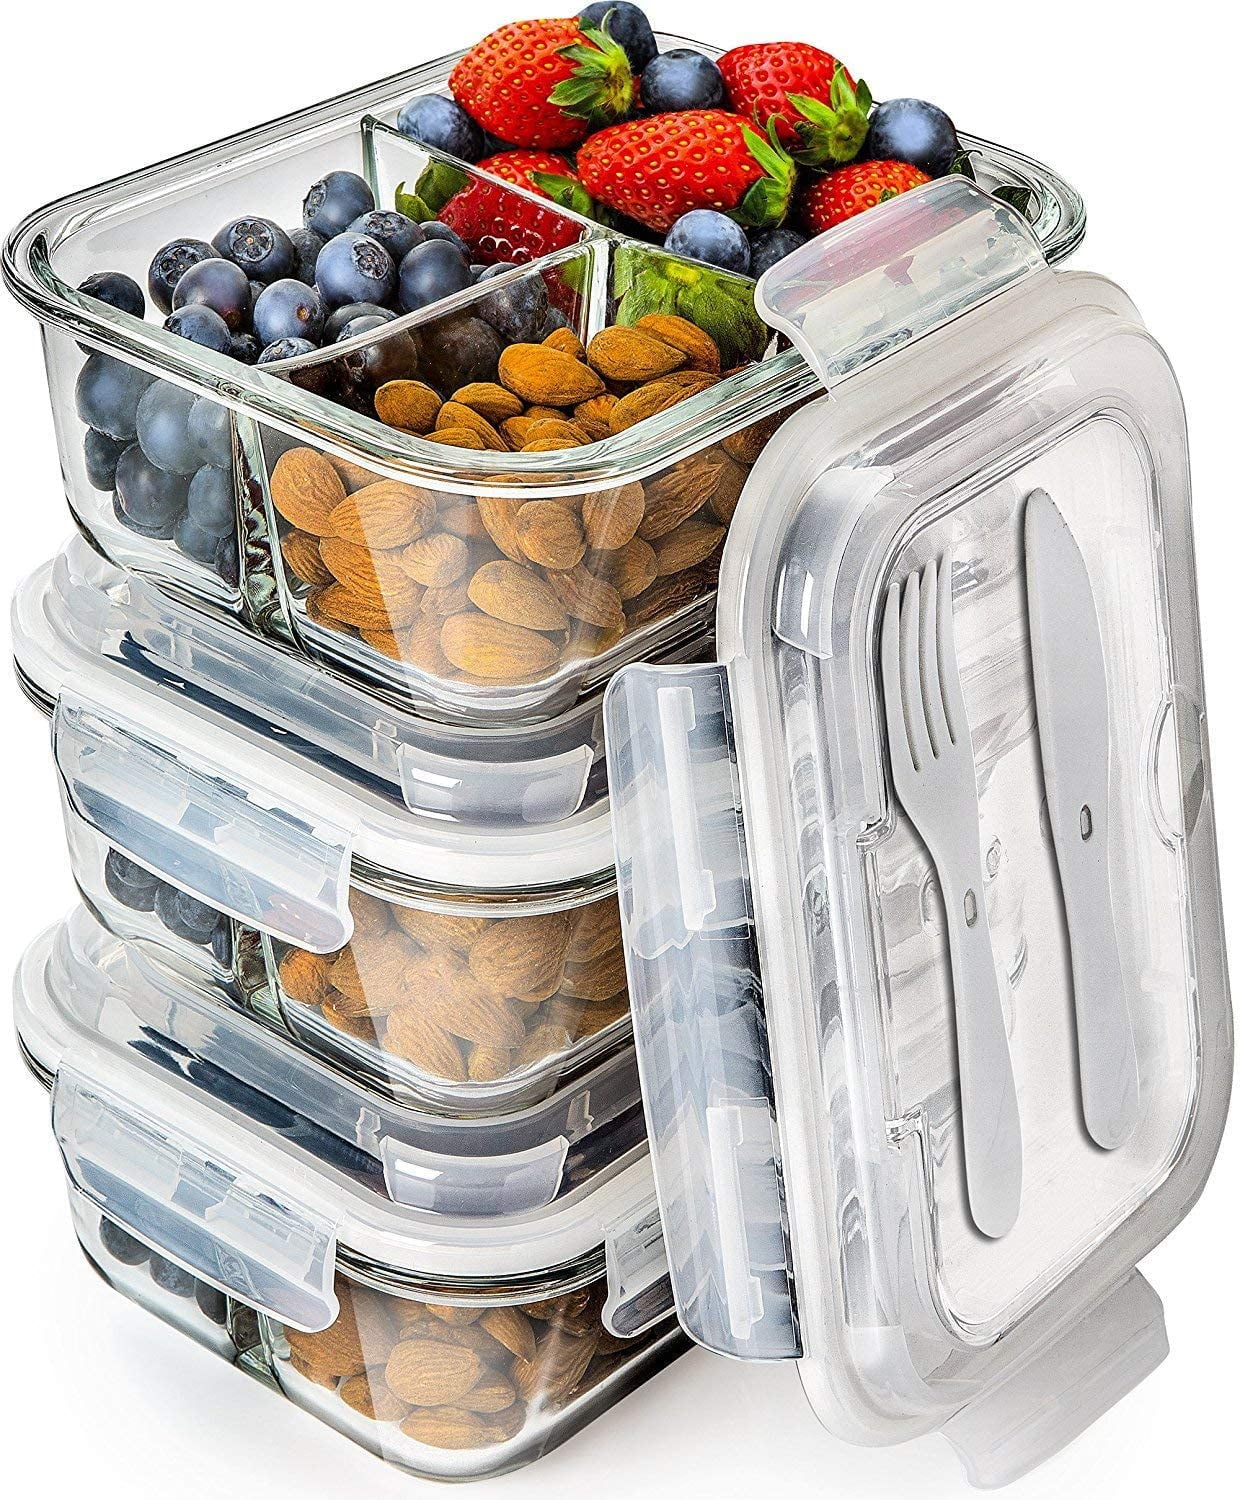 Clear Divided Lunch Container Bento Food Box 3-Compartment Airtight Storage 